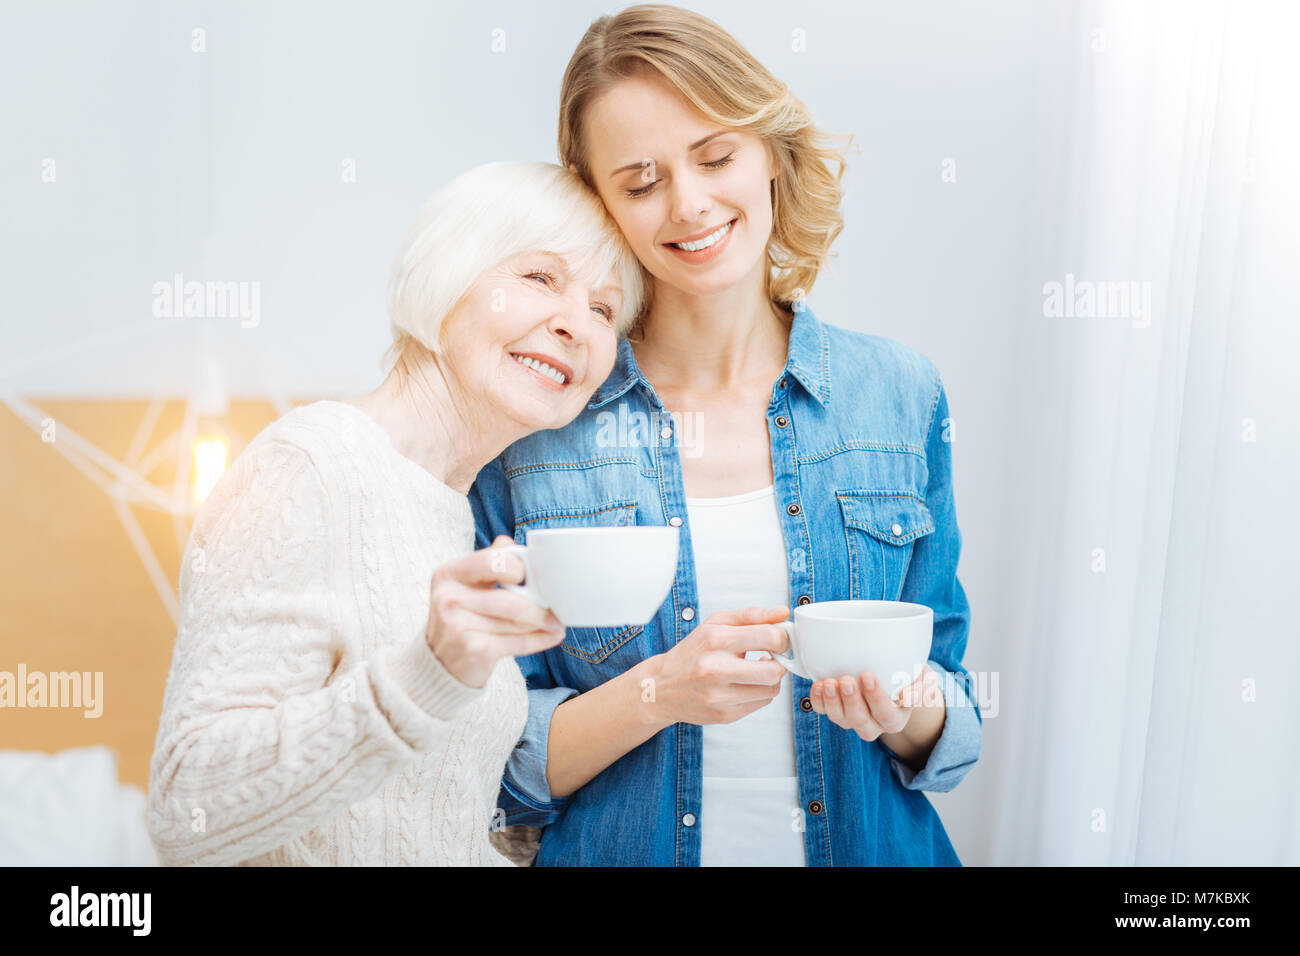 Cute young woman closing her eyes and smiling while being with grandmother Stock Photo